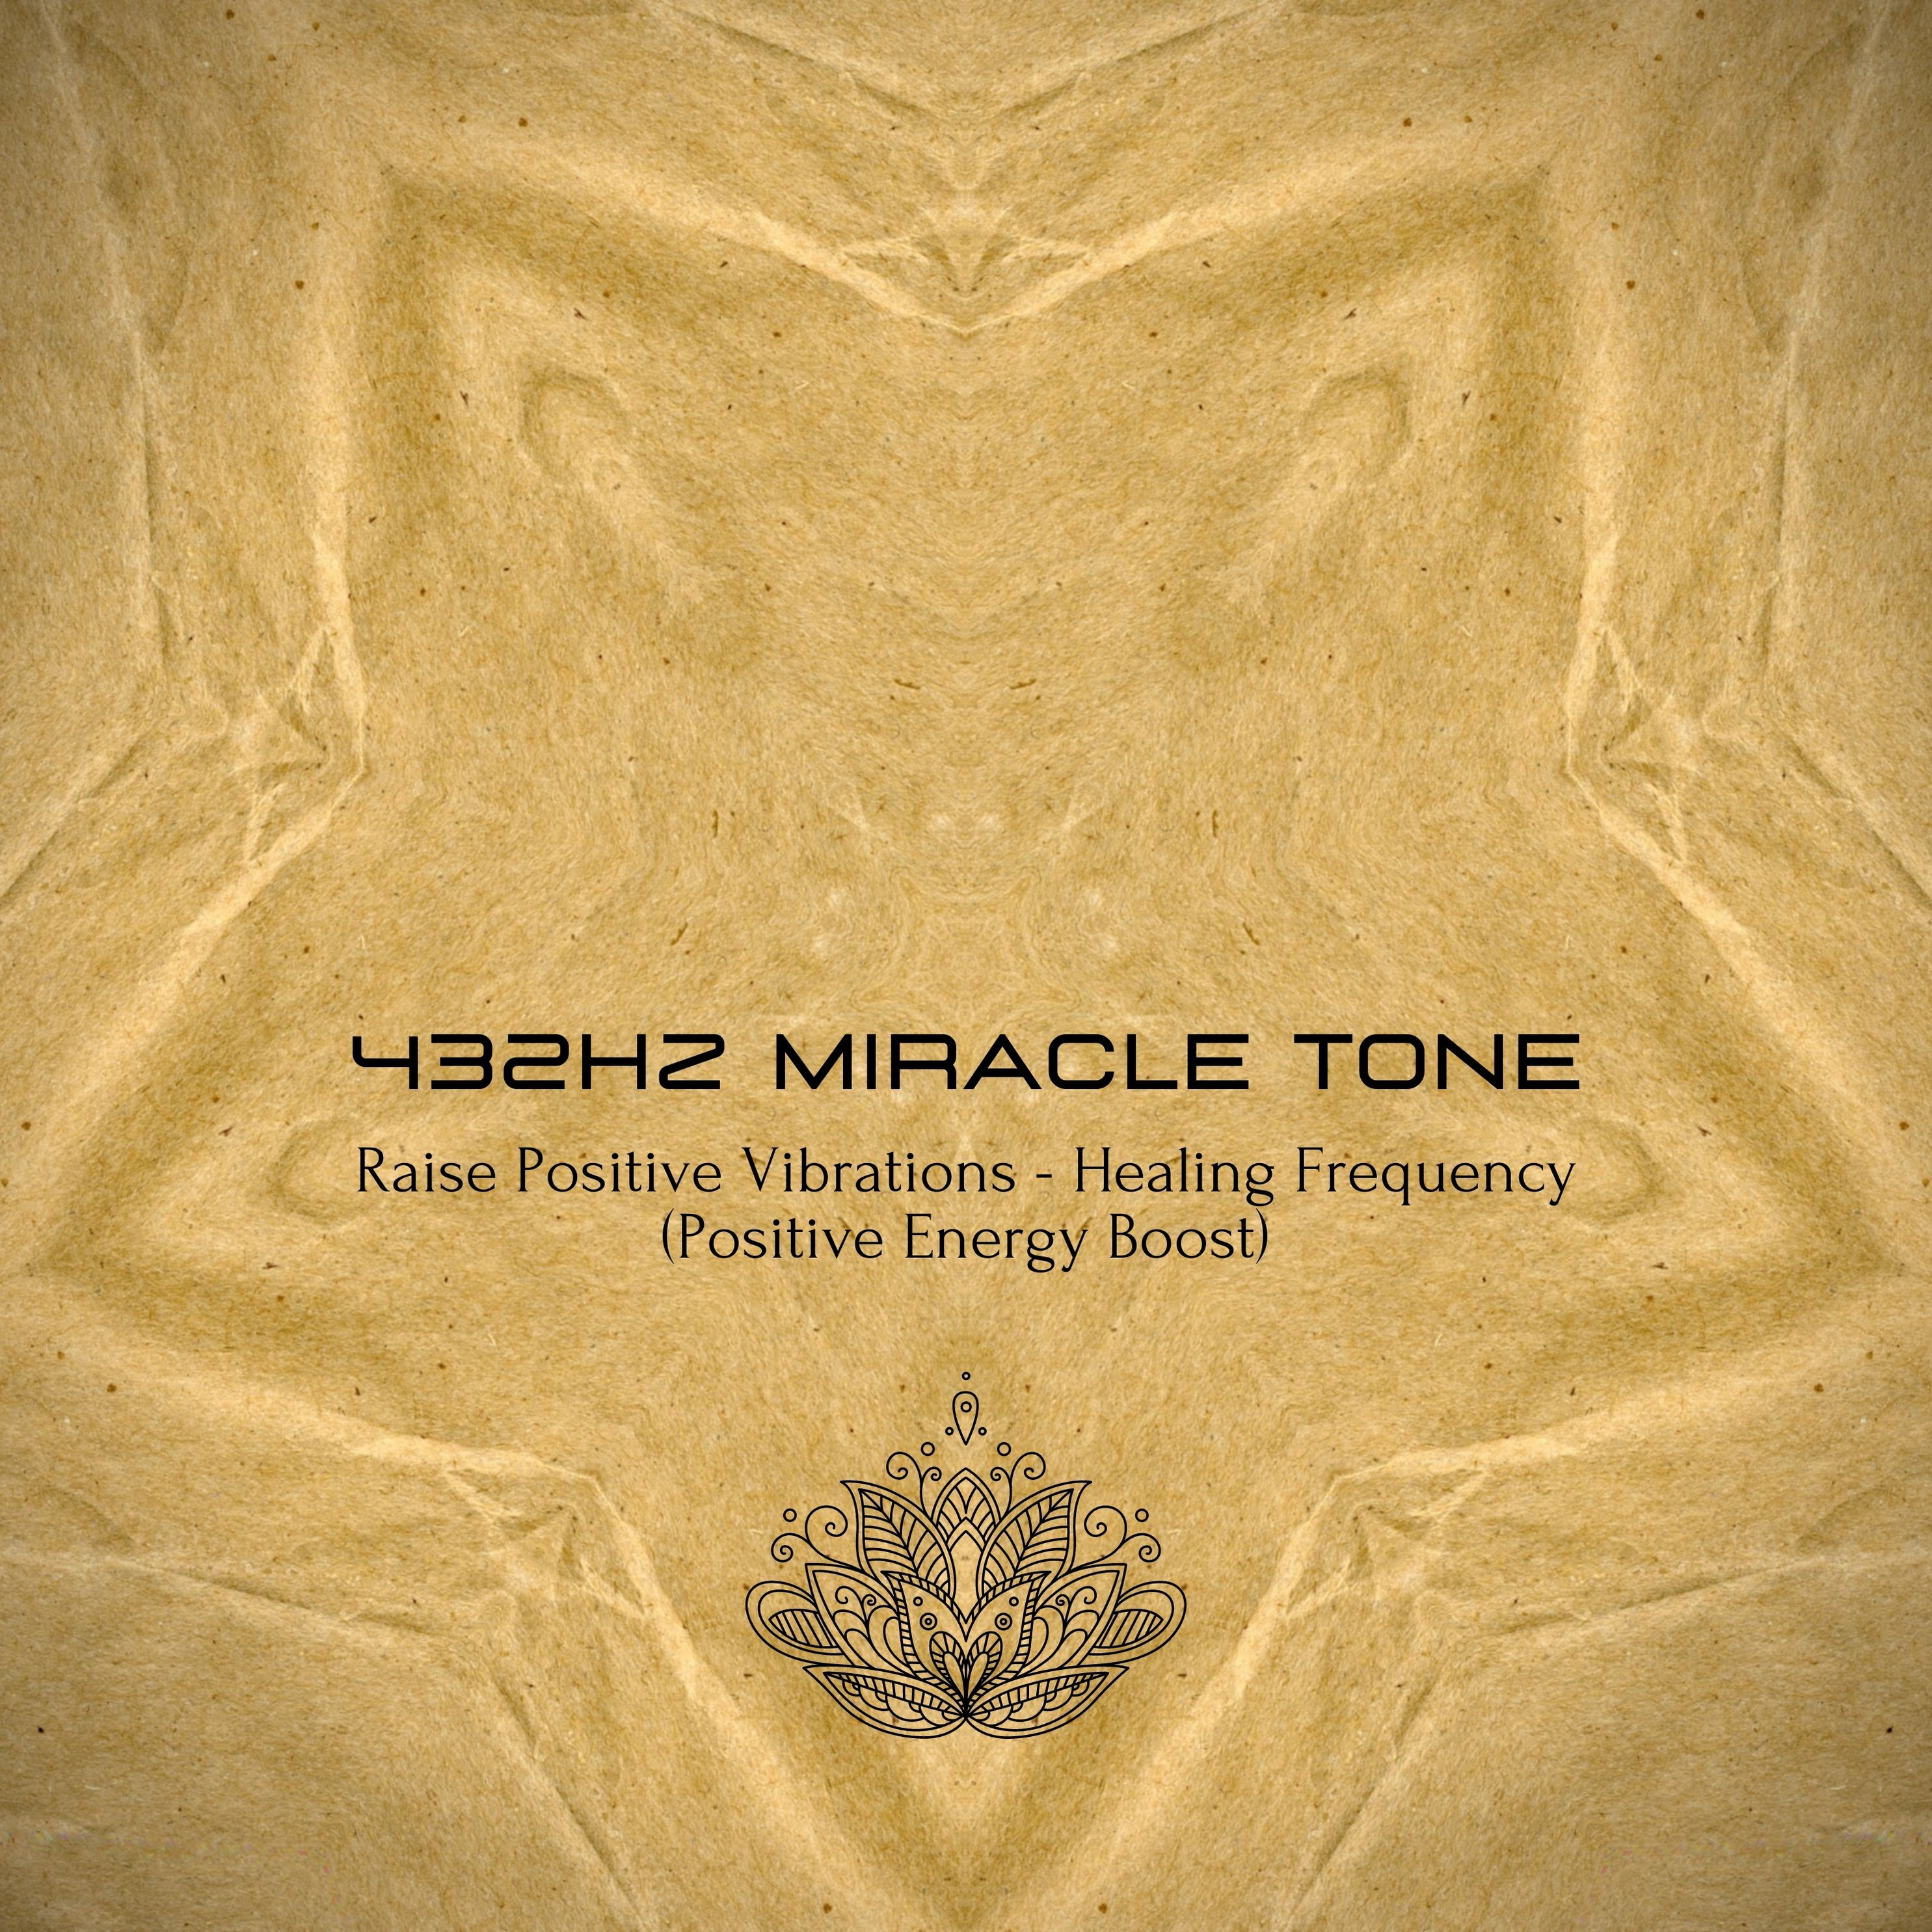 Healing Frequencies - 1 - 432Hz Miracle Tone - Raise Your Positive  Vibrations Hörbuch Download